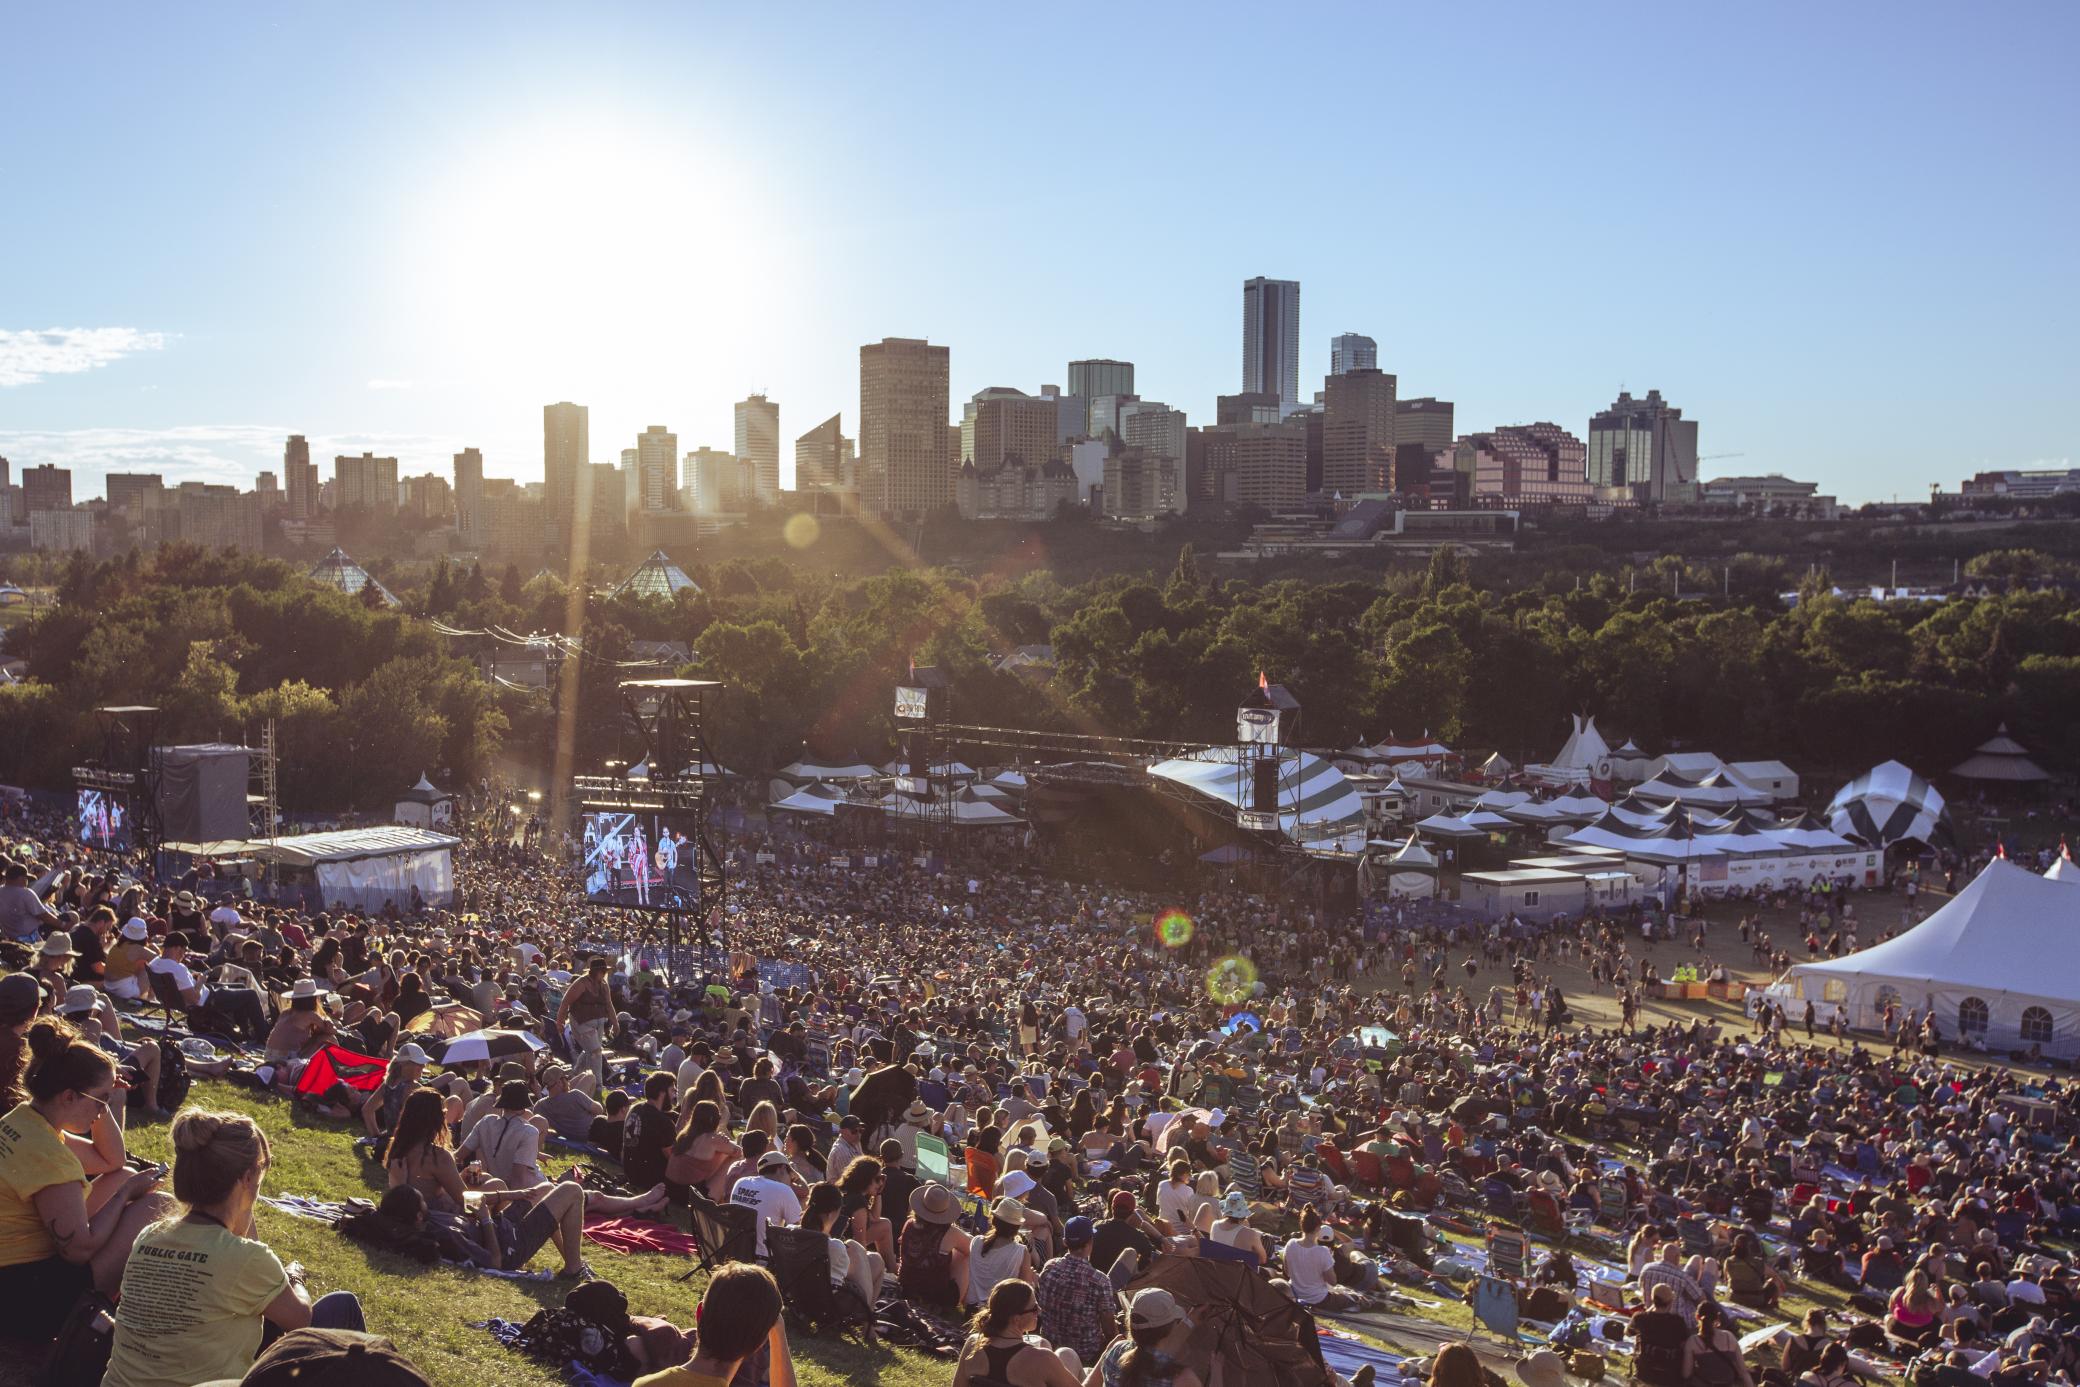 With downtown Edmonton’s skyline as a backdrop, hundreds of people sit on the grassy slopes of Gallagher Park, watching a musician perform on the Folk Fest’s stages.  